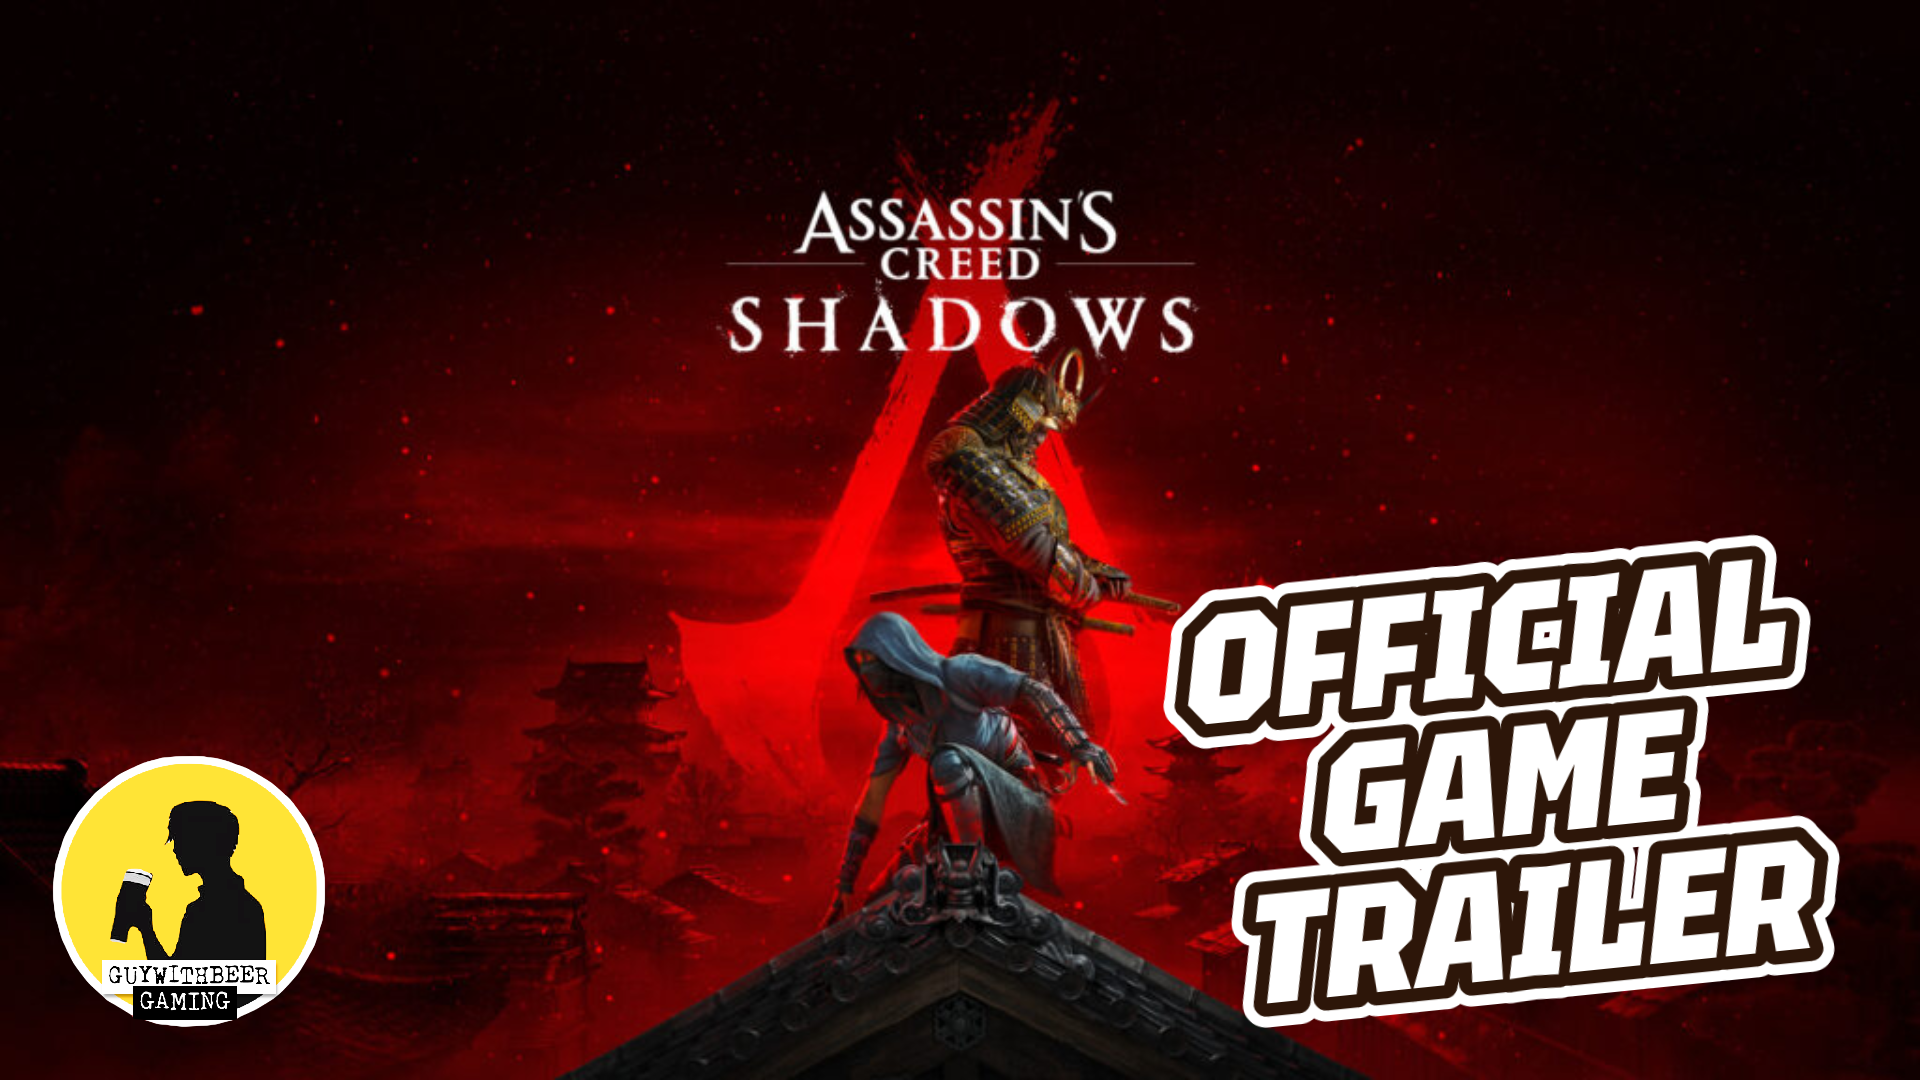 ASSASSIN'S CREED SHADOWS | GAME TRAILER #assassinscreedshadows #trailer #assassinscreed